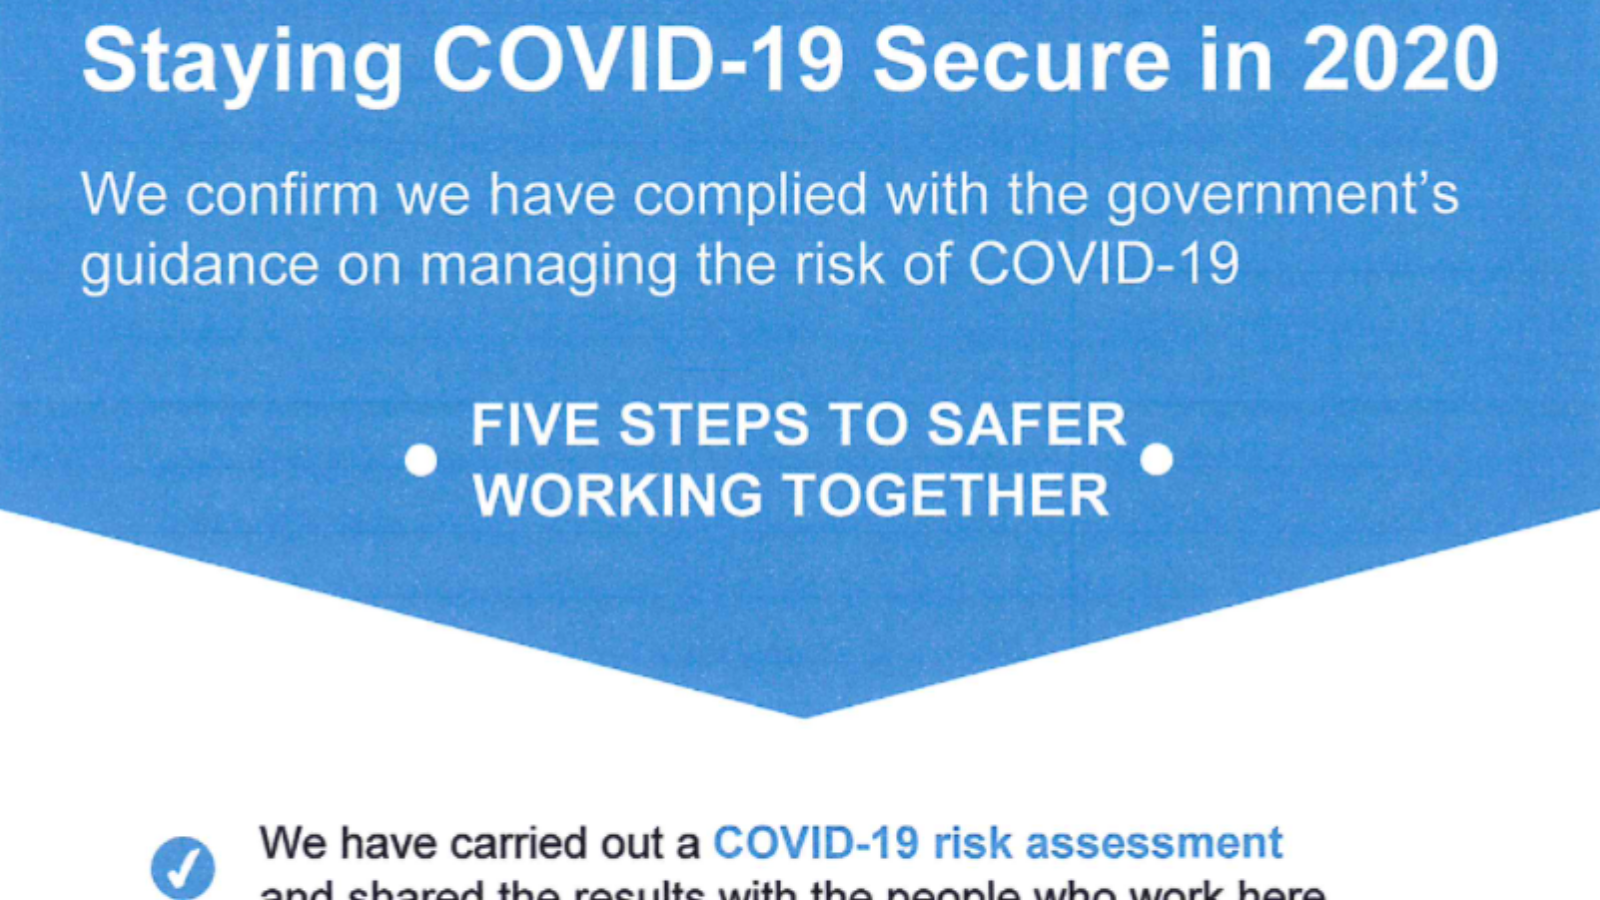 STAYING COVID-19 SECURE IN 2020